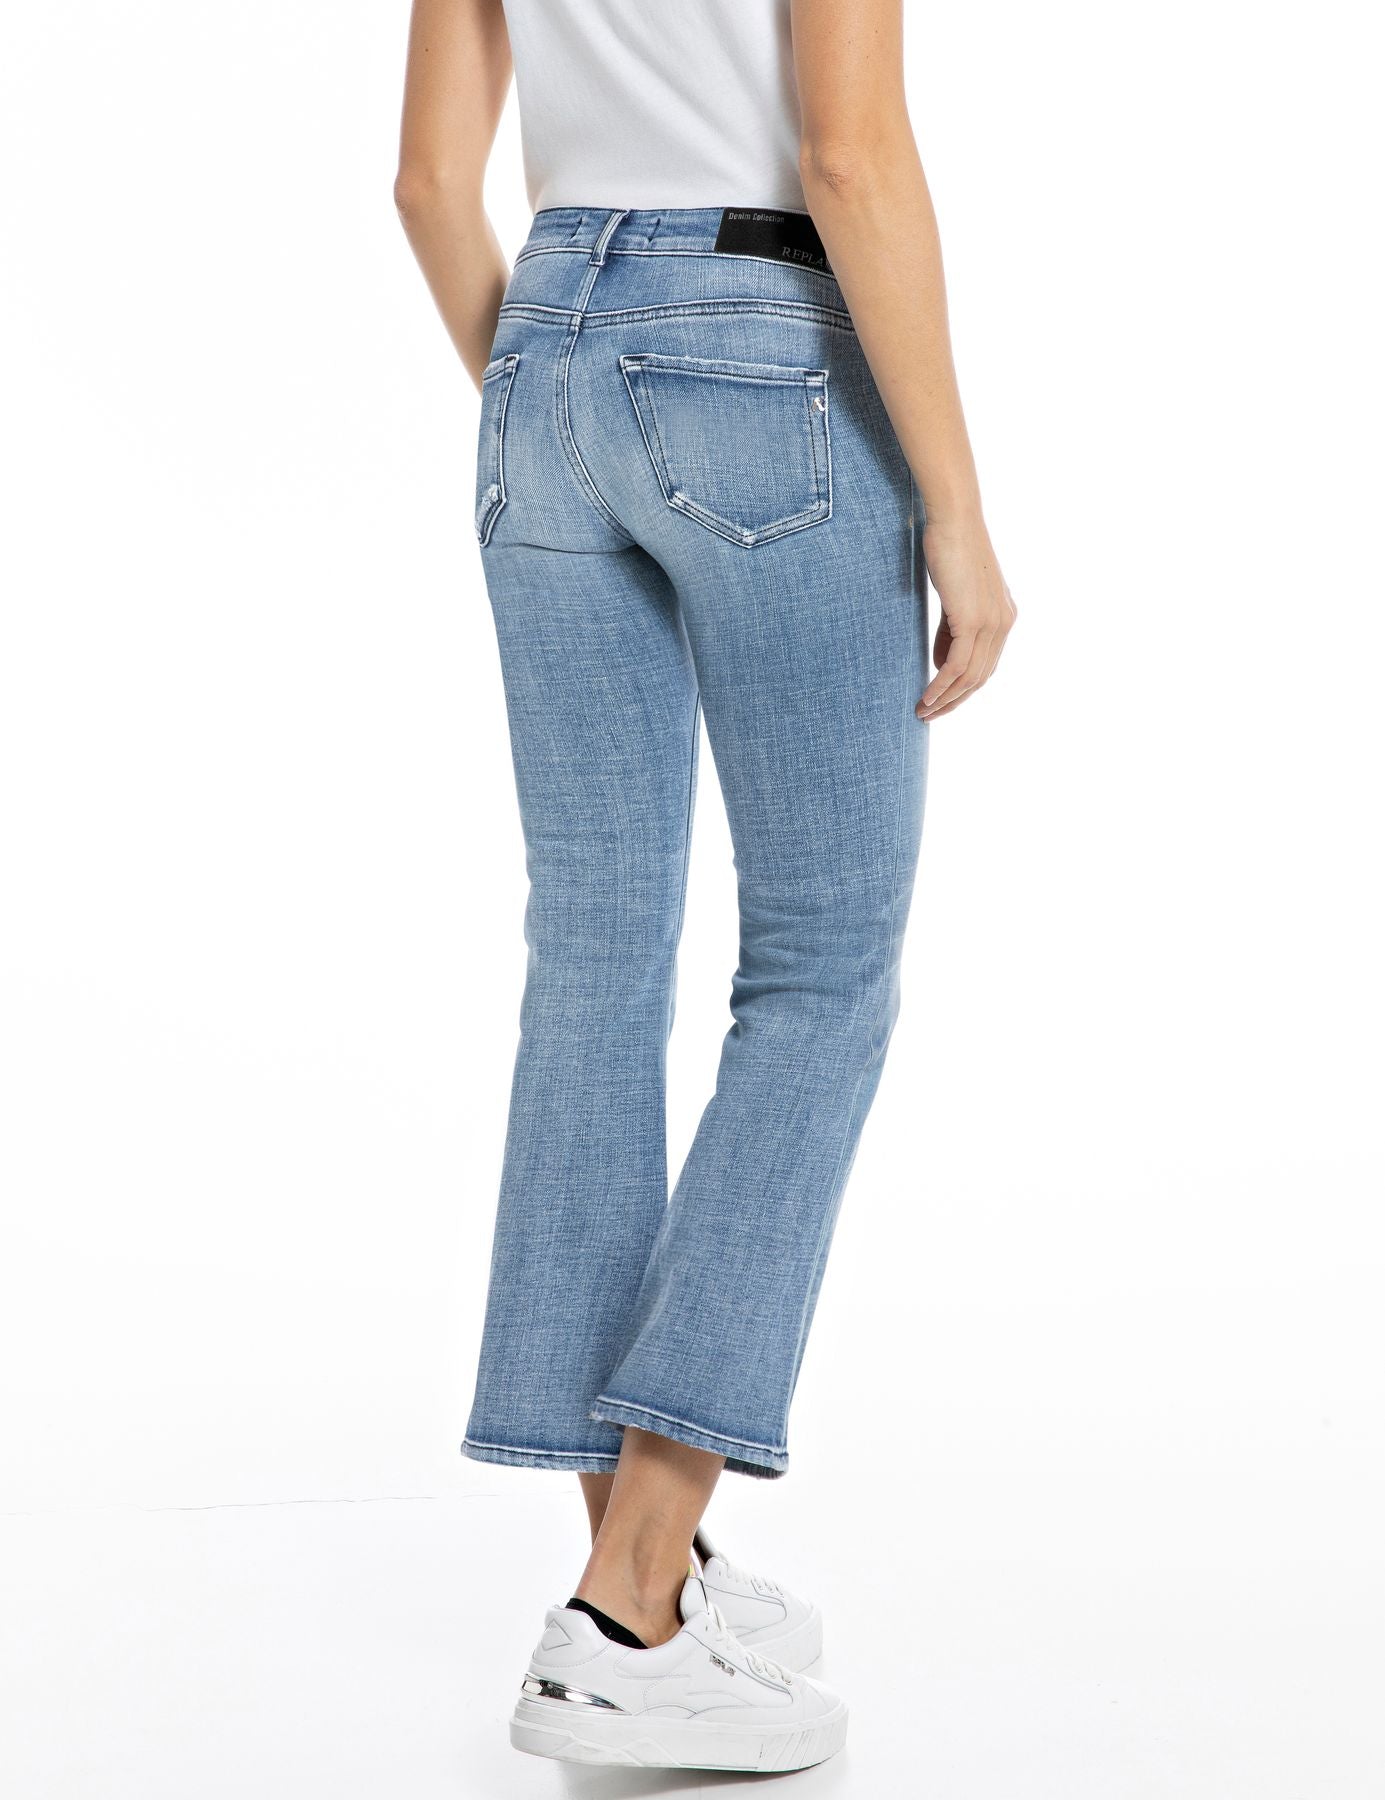 WC429 733 687 Donna REPLAY JEANS